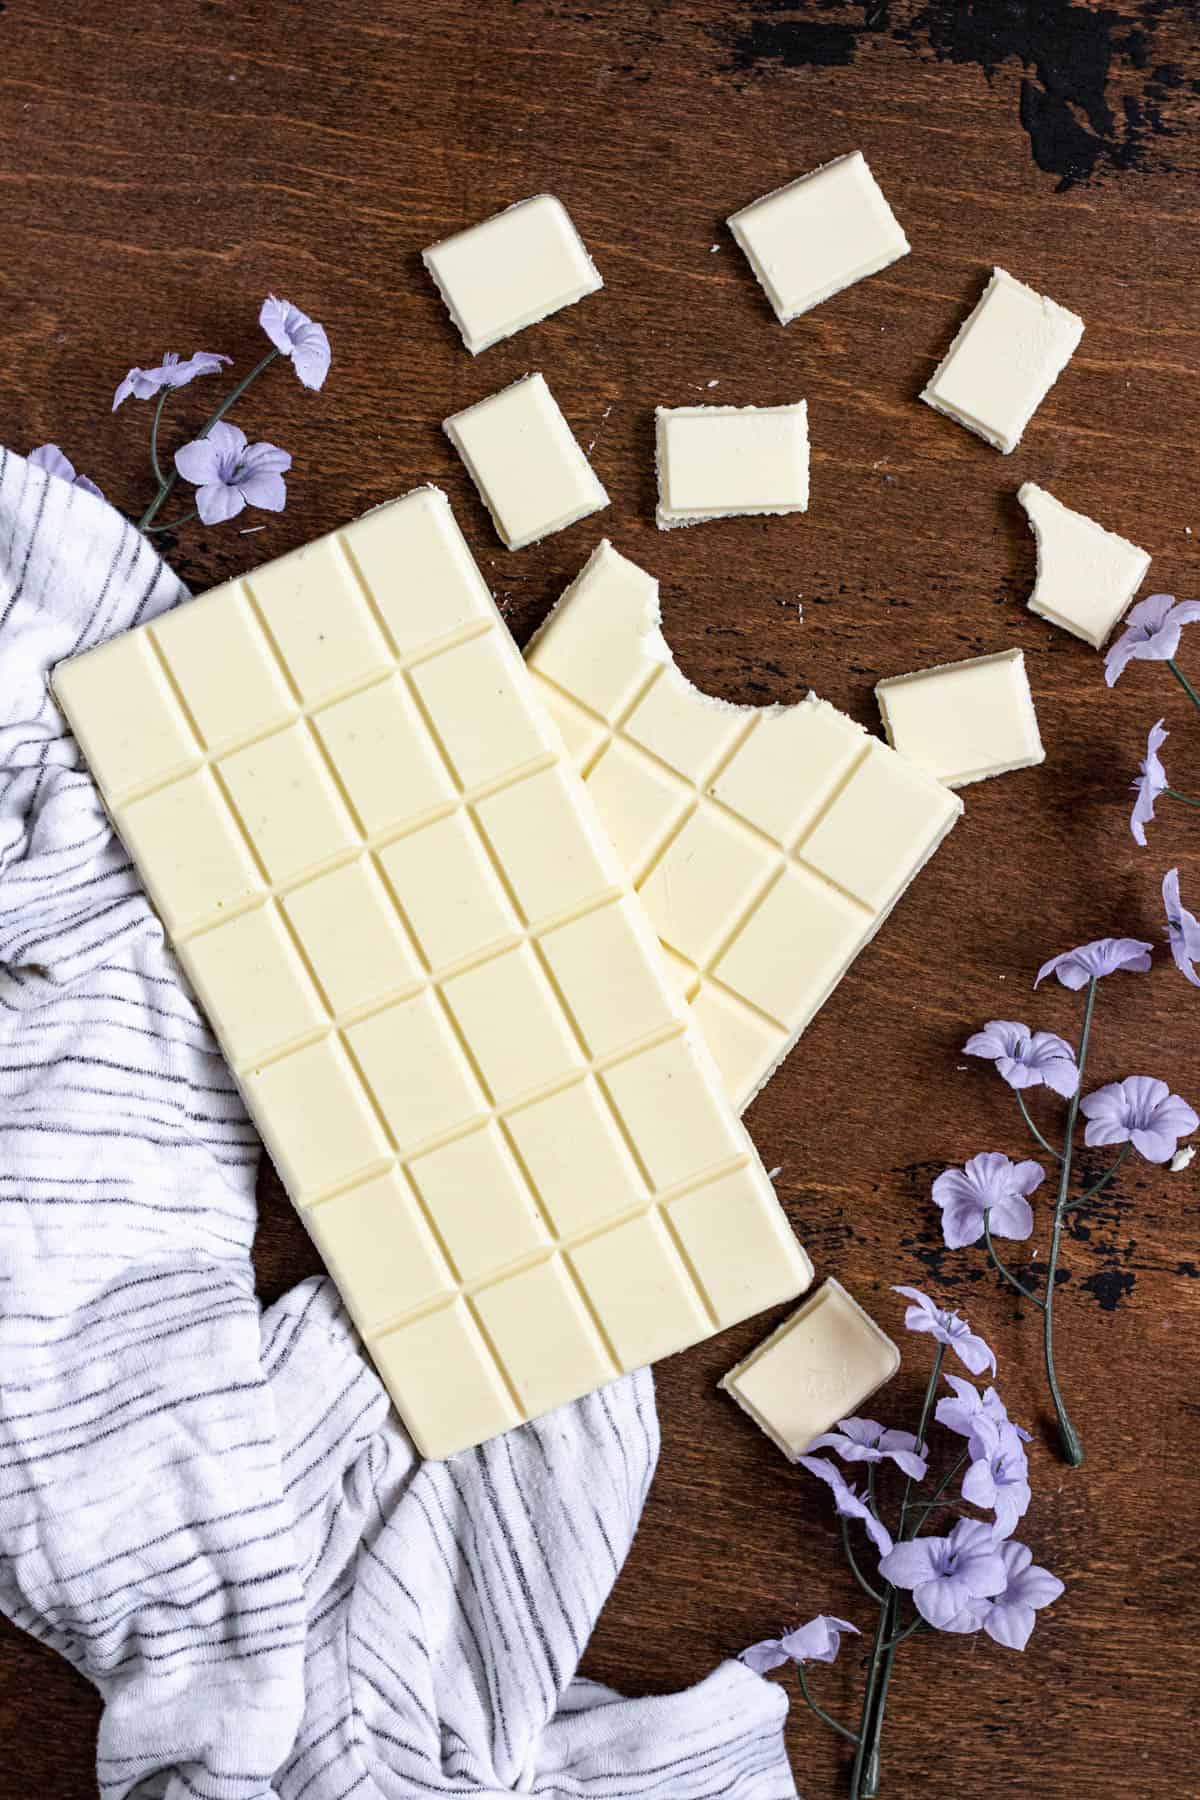 white chocolate broken into pieces on a dark colored background